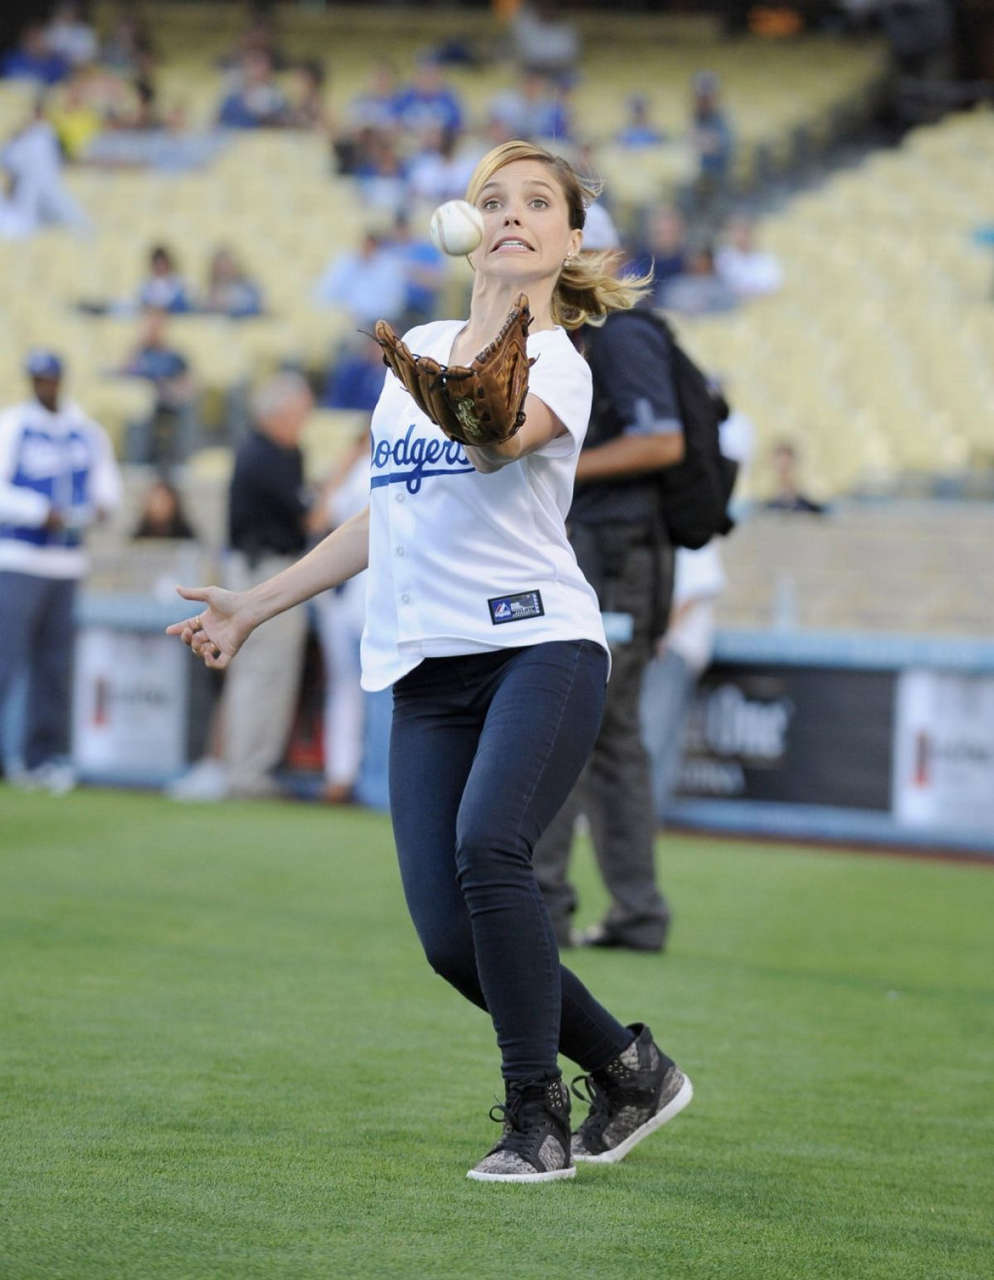 Sophia Bush Throw First Pitch Dodgers Game Los Angeles